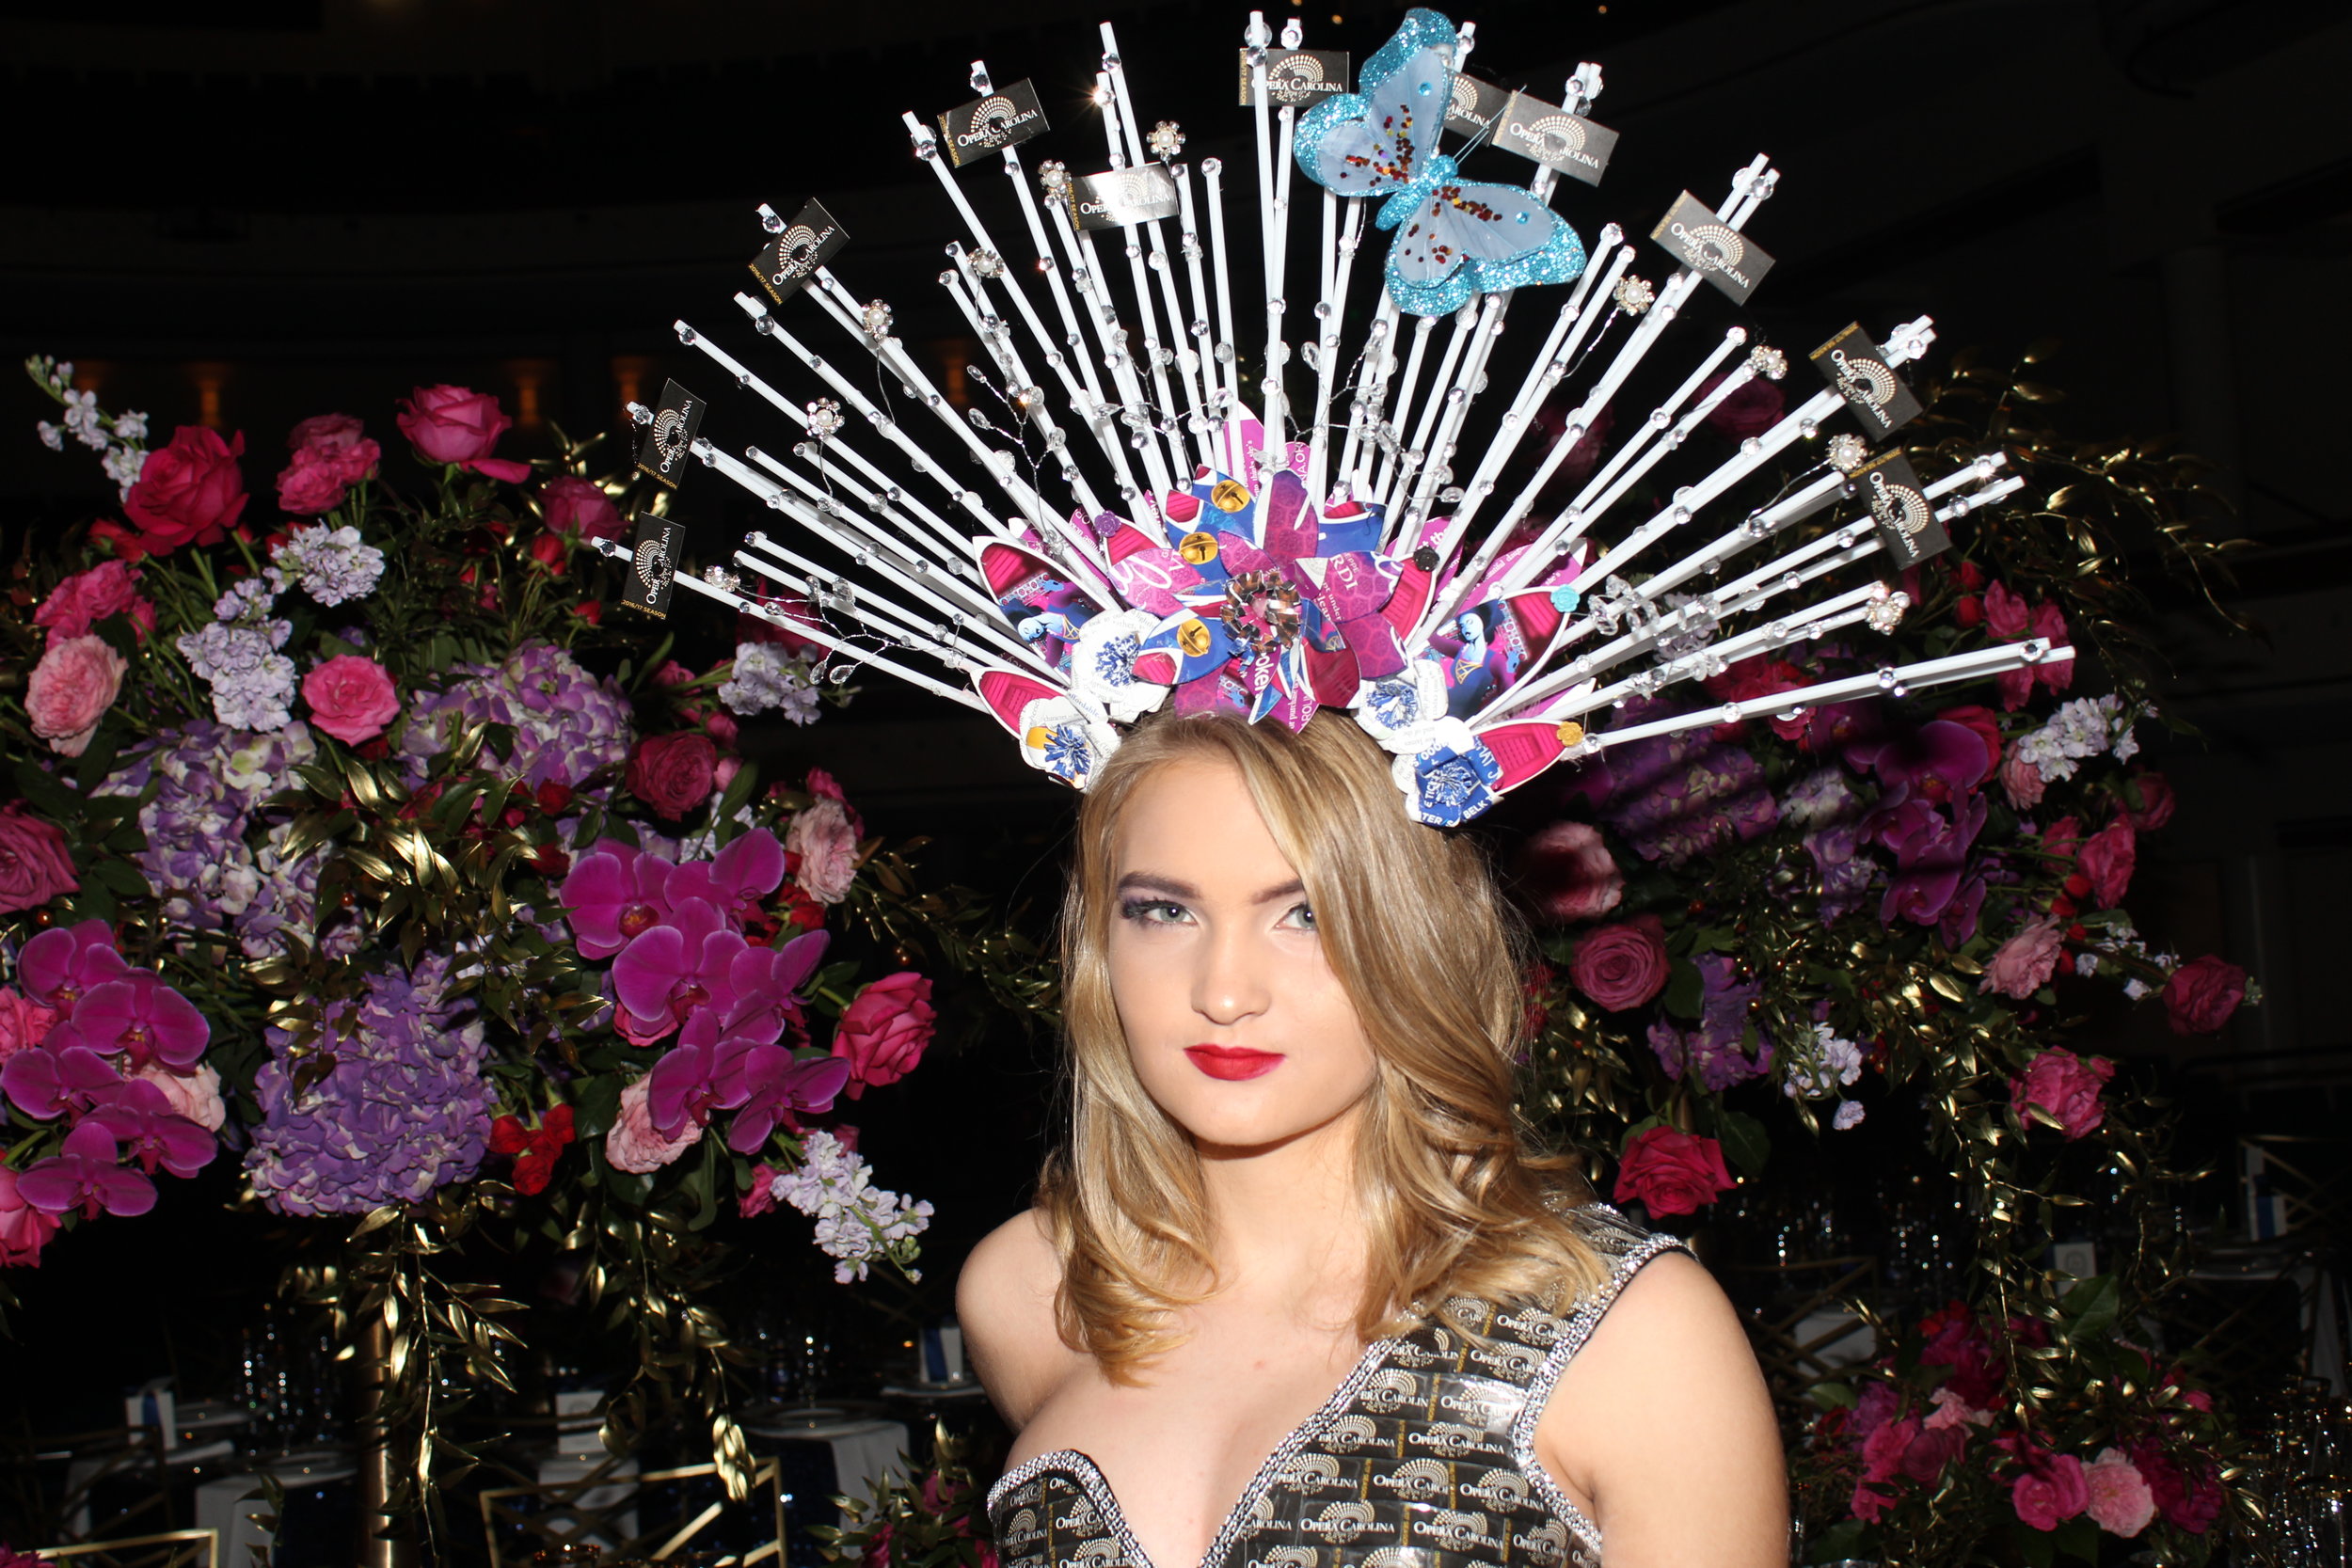  A model shows off a fantastical design made from recycled opera programs during the cocktail hour.  